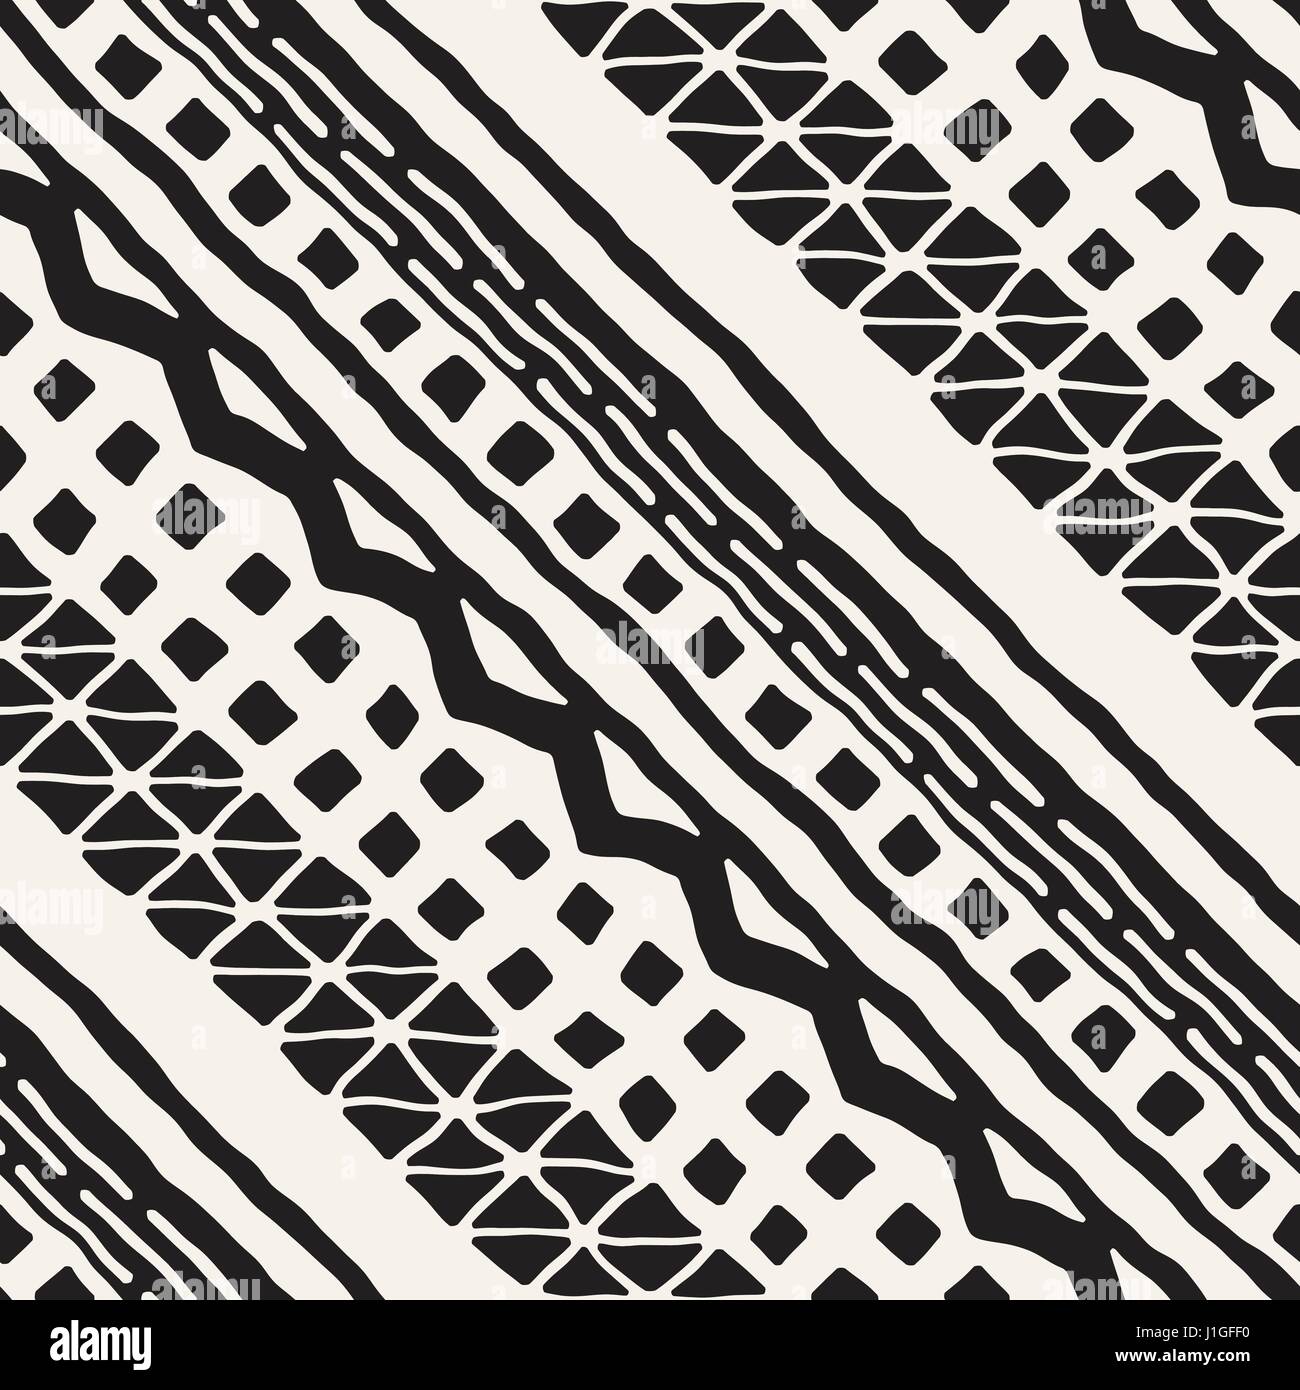 Black and white tribal vector seamless pattern with doodle elements. Aztec abstract geometric art print. Ethnic ornamental hand drawn backdrop. Stock Vector